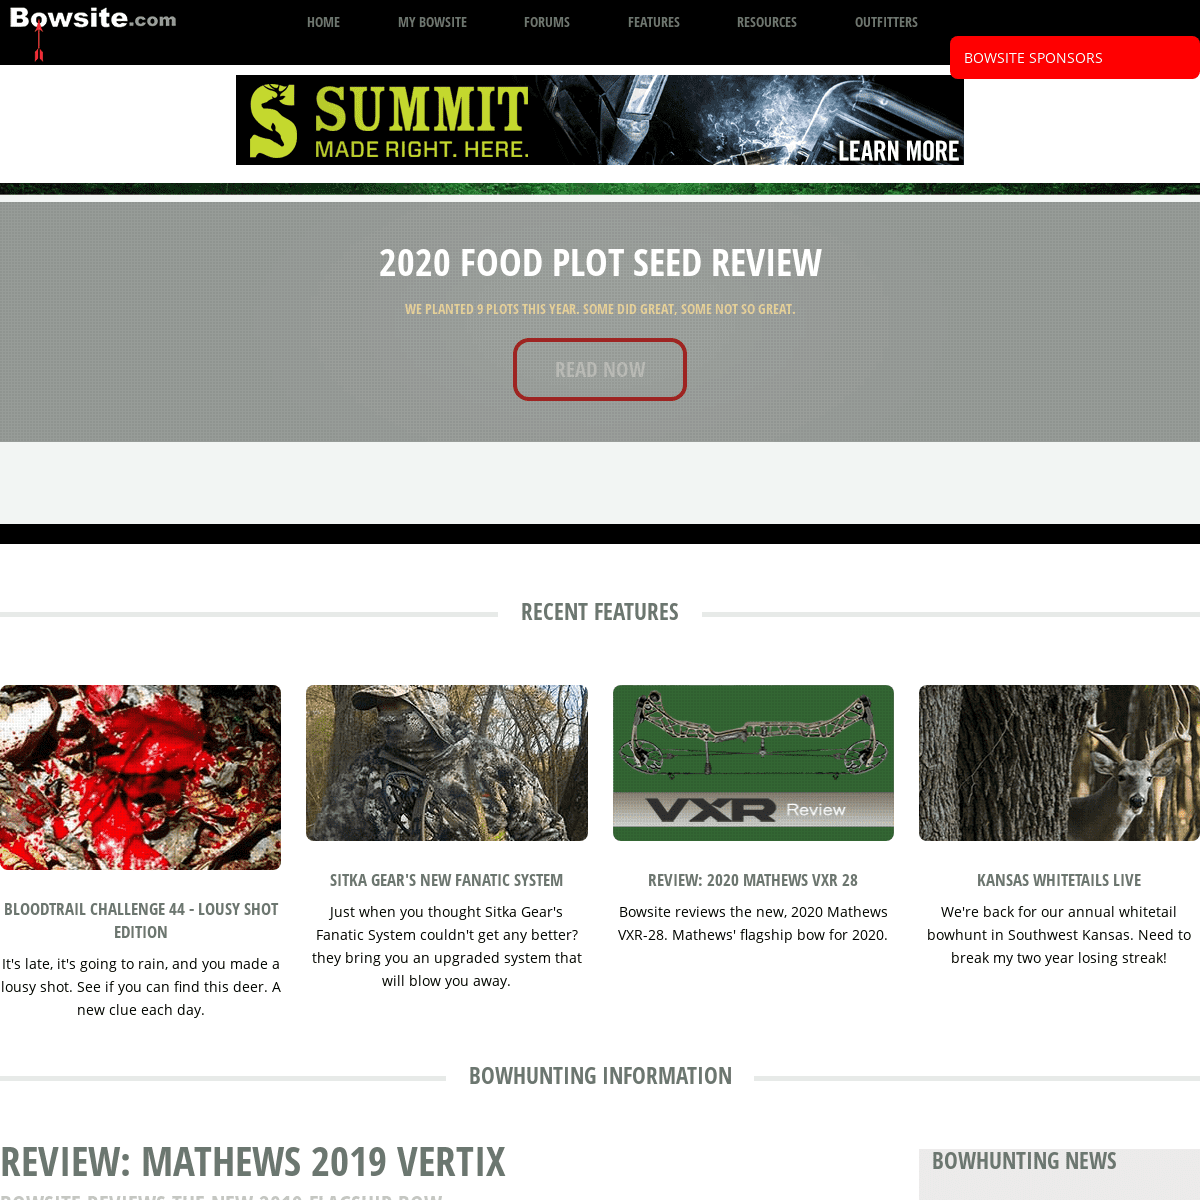 A complete backup of bowsite.com